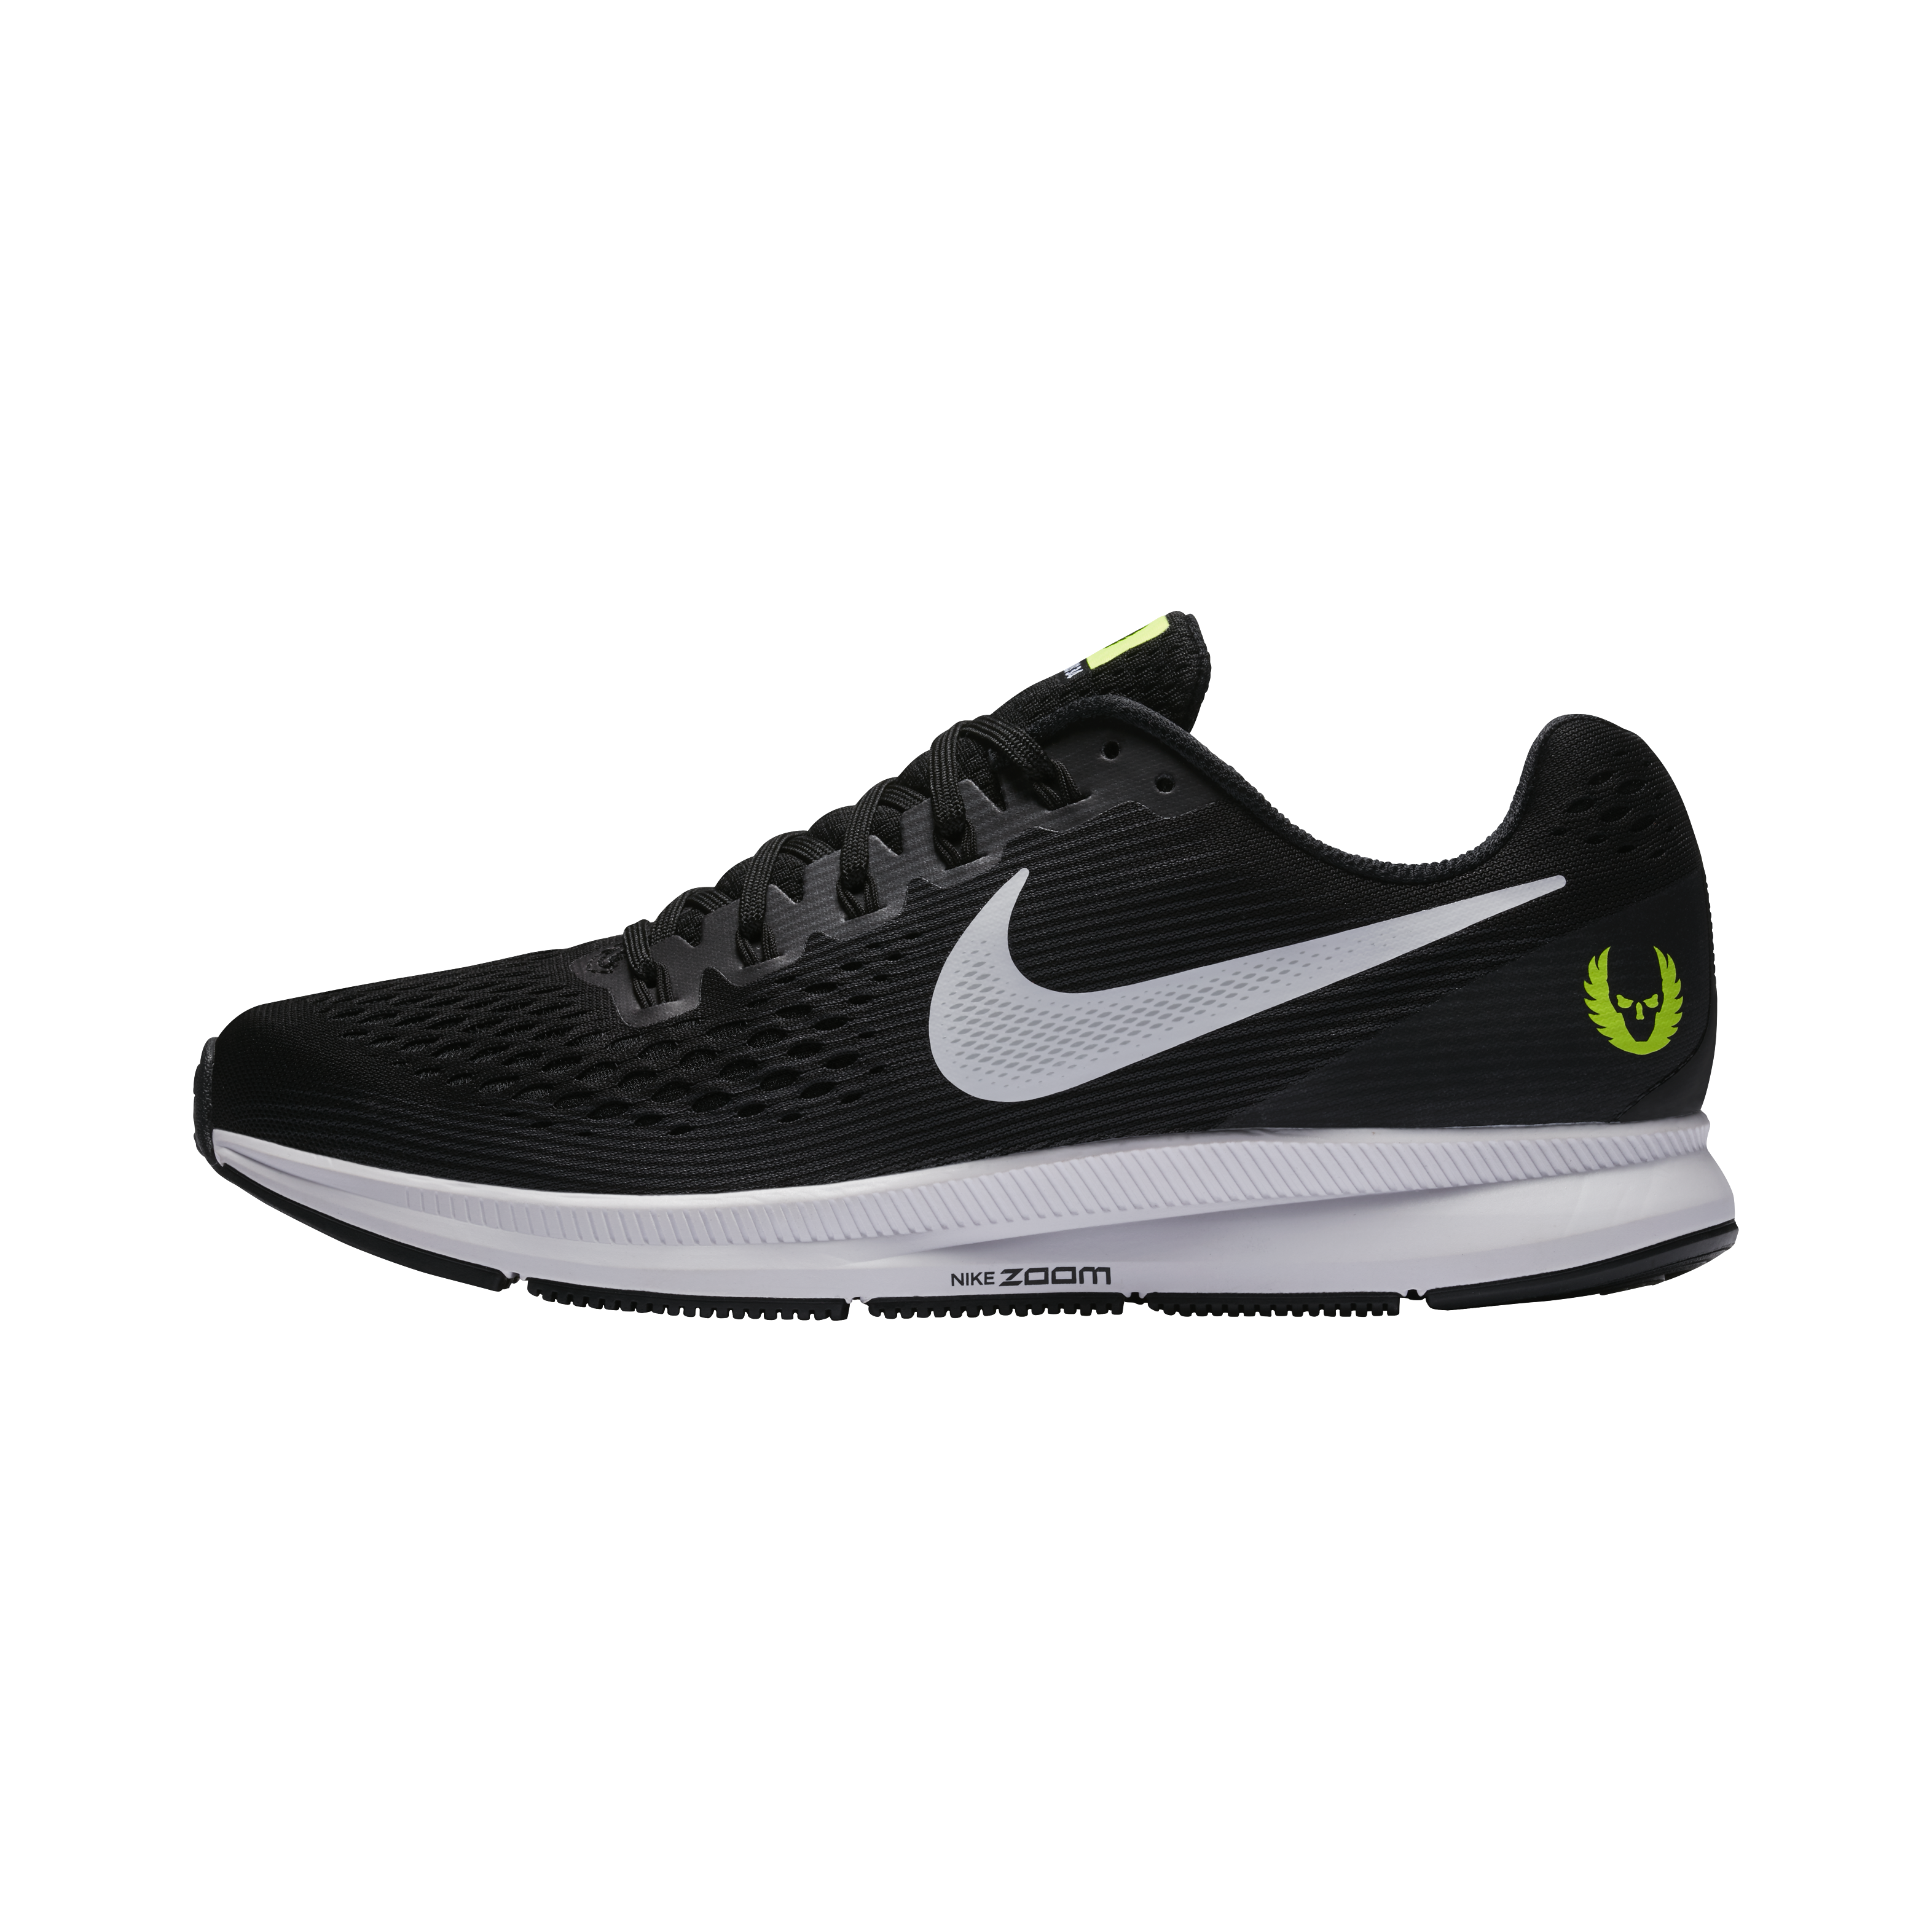 Nike Running Shoes PNG Image Transparent | PNG Arts